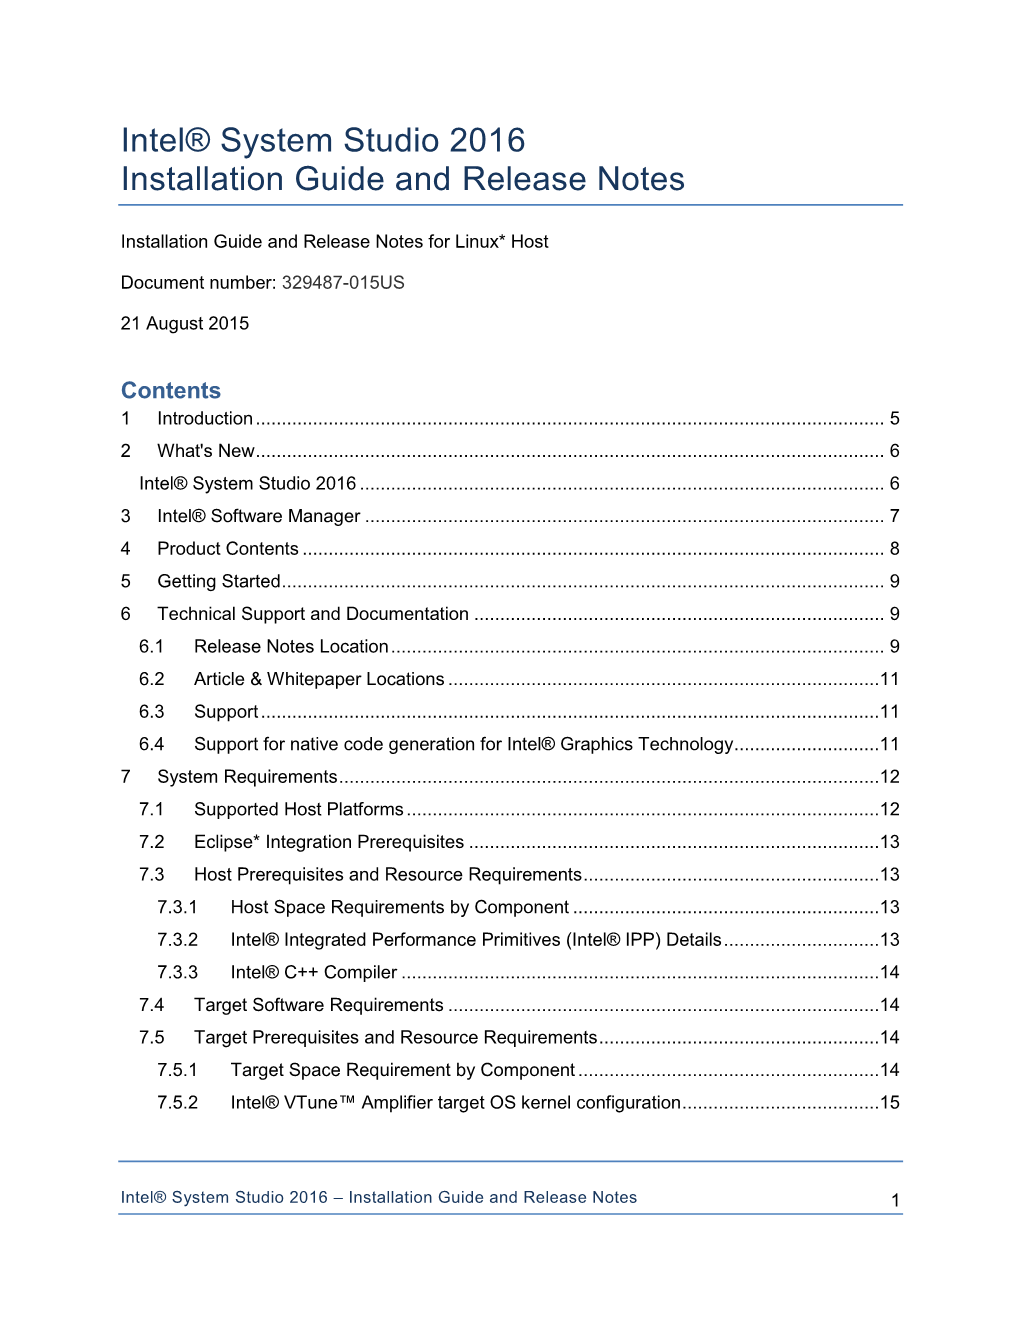 Intel(R) System Studio Release Notes and Installation Guide